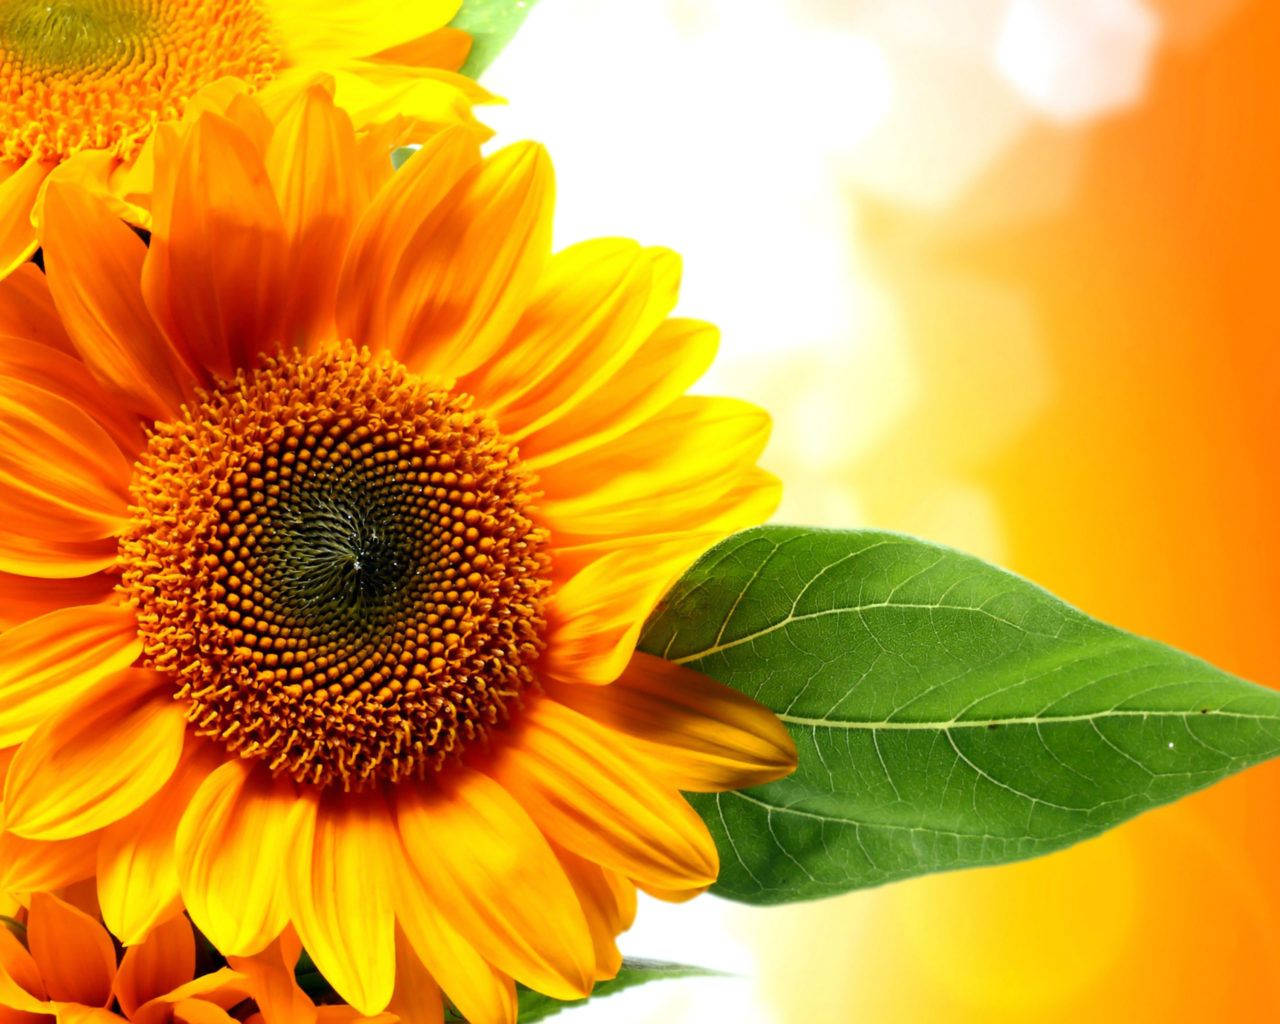 "Beauty of Nature combining vibrant Sunflowers and delicate Roses" Wallpaper